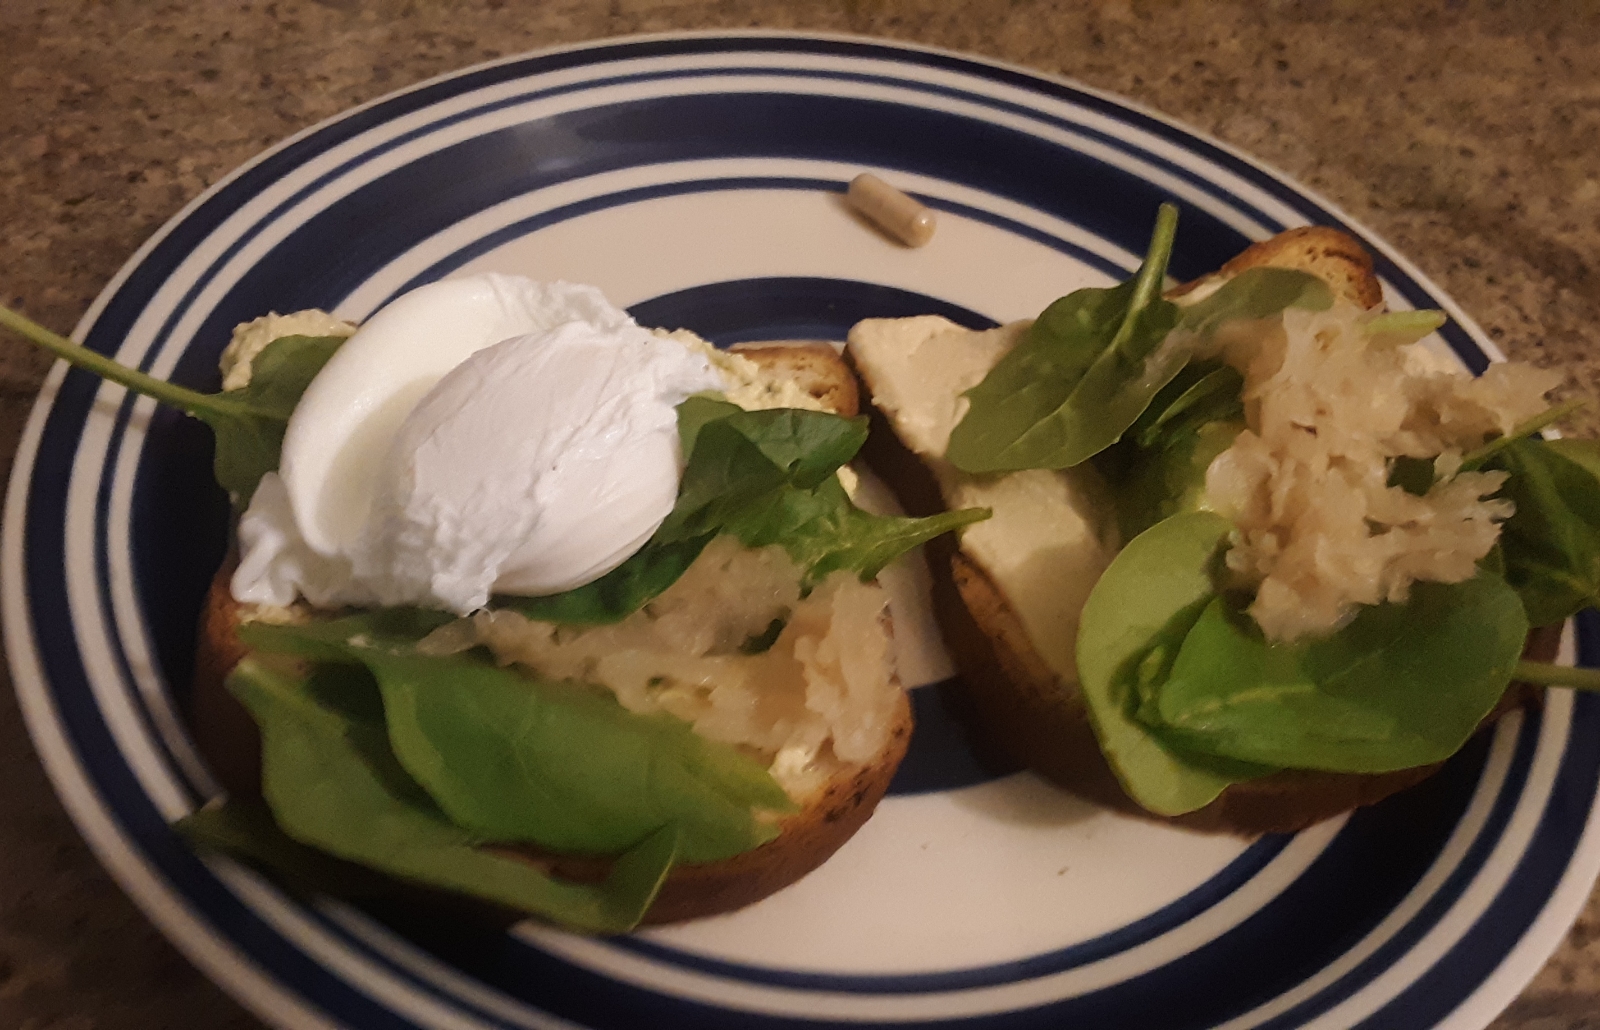 Living well in the 21st century - Limassol, Cyprus - gluten free bread with Sauerkraut, poached egg, sliced avocado, hummus and spinach on a blue plate. 